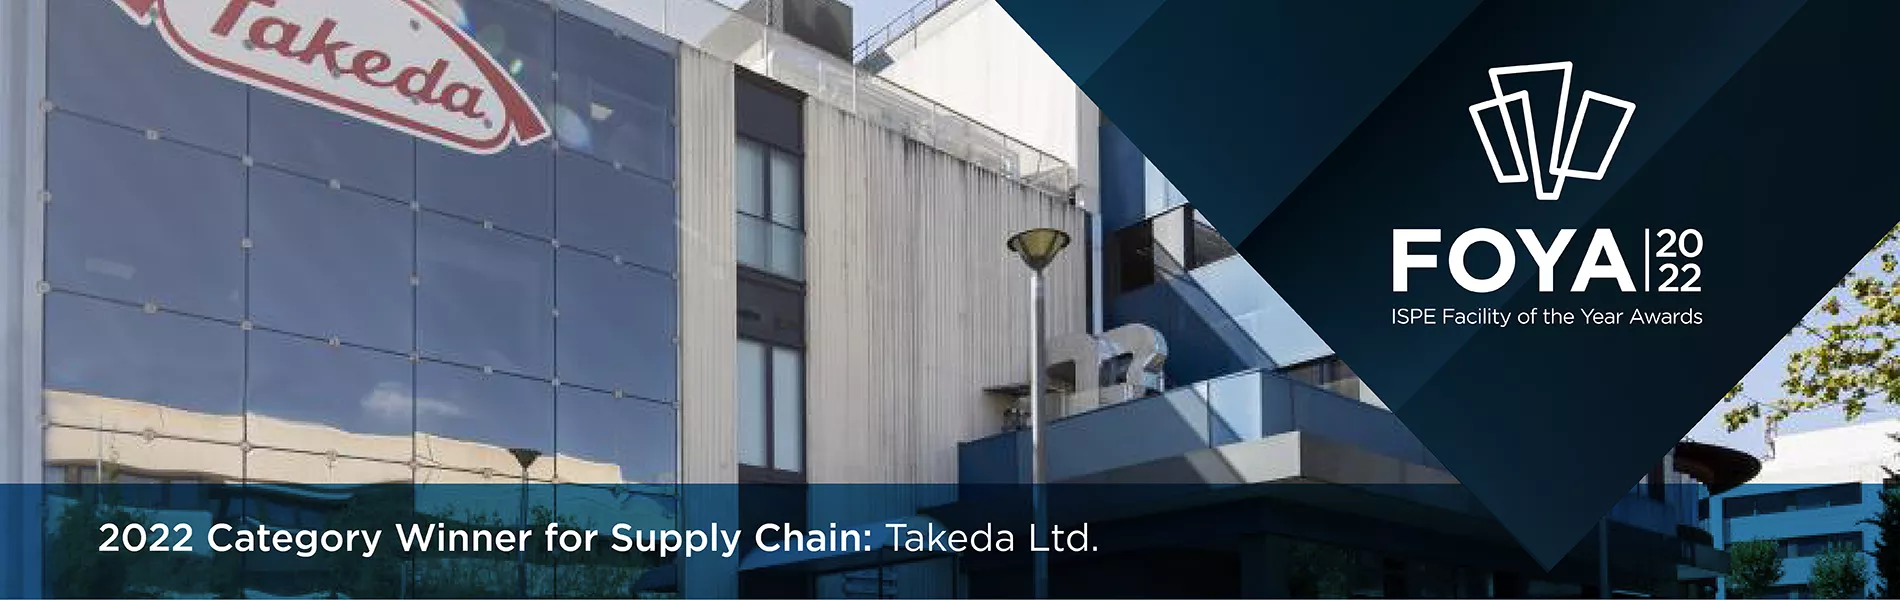 2022 Category Winner for Supply Chain